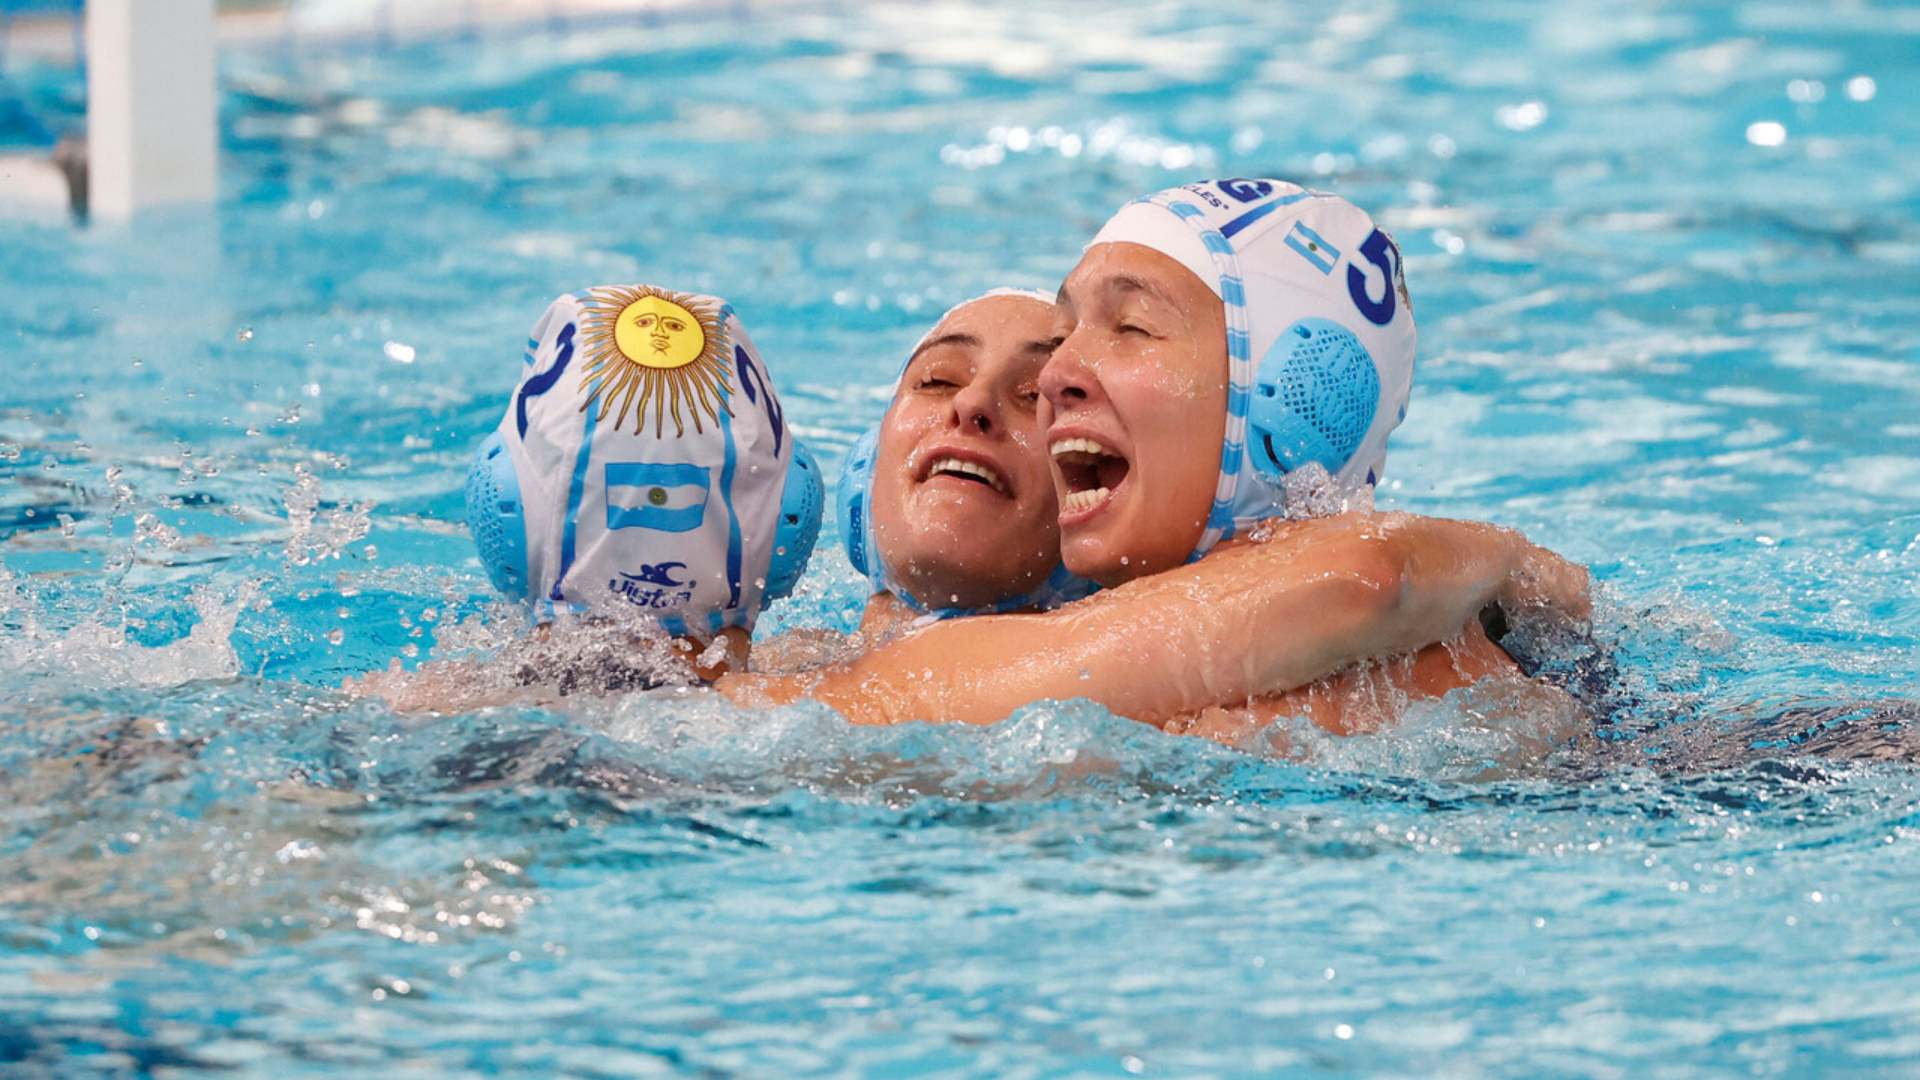 Female's Water Polo: Argentina is the first semifinalist